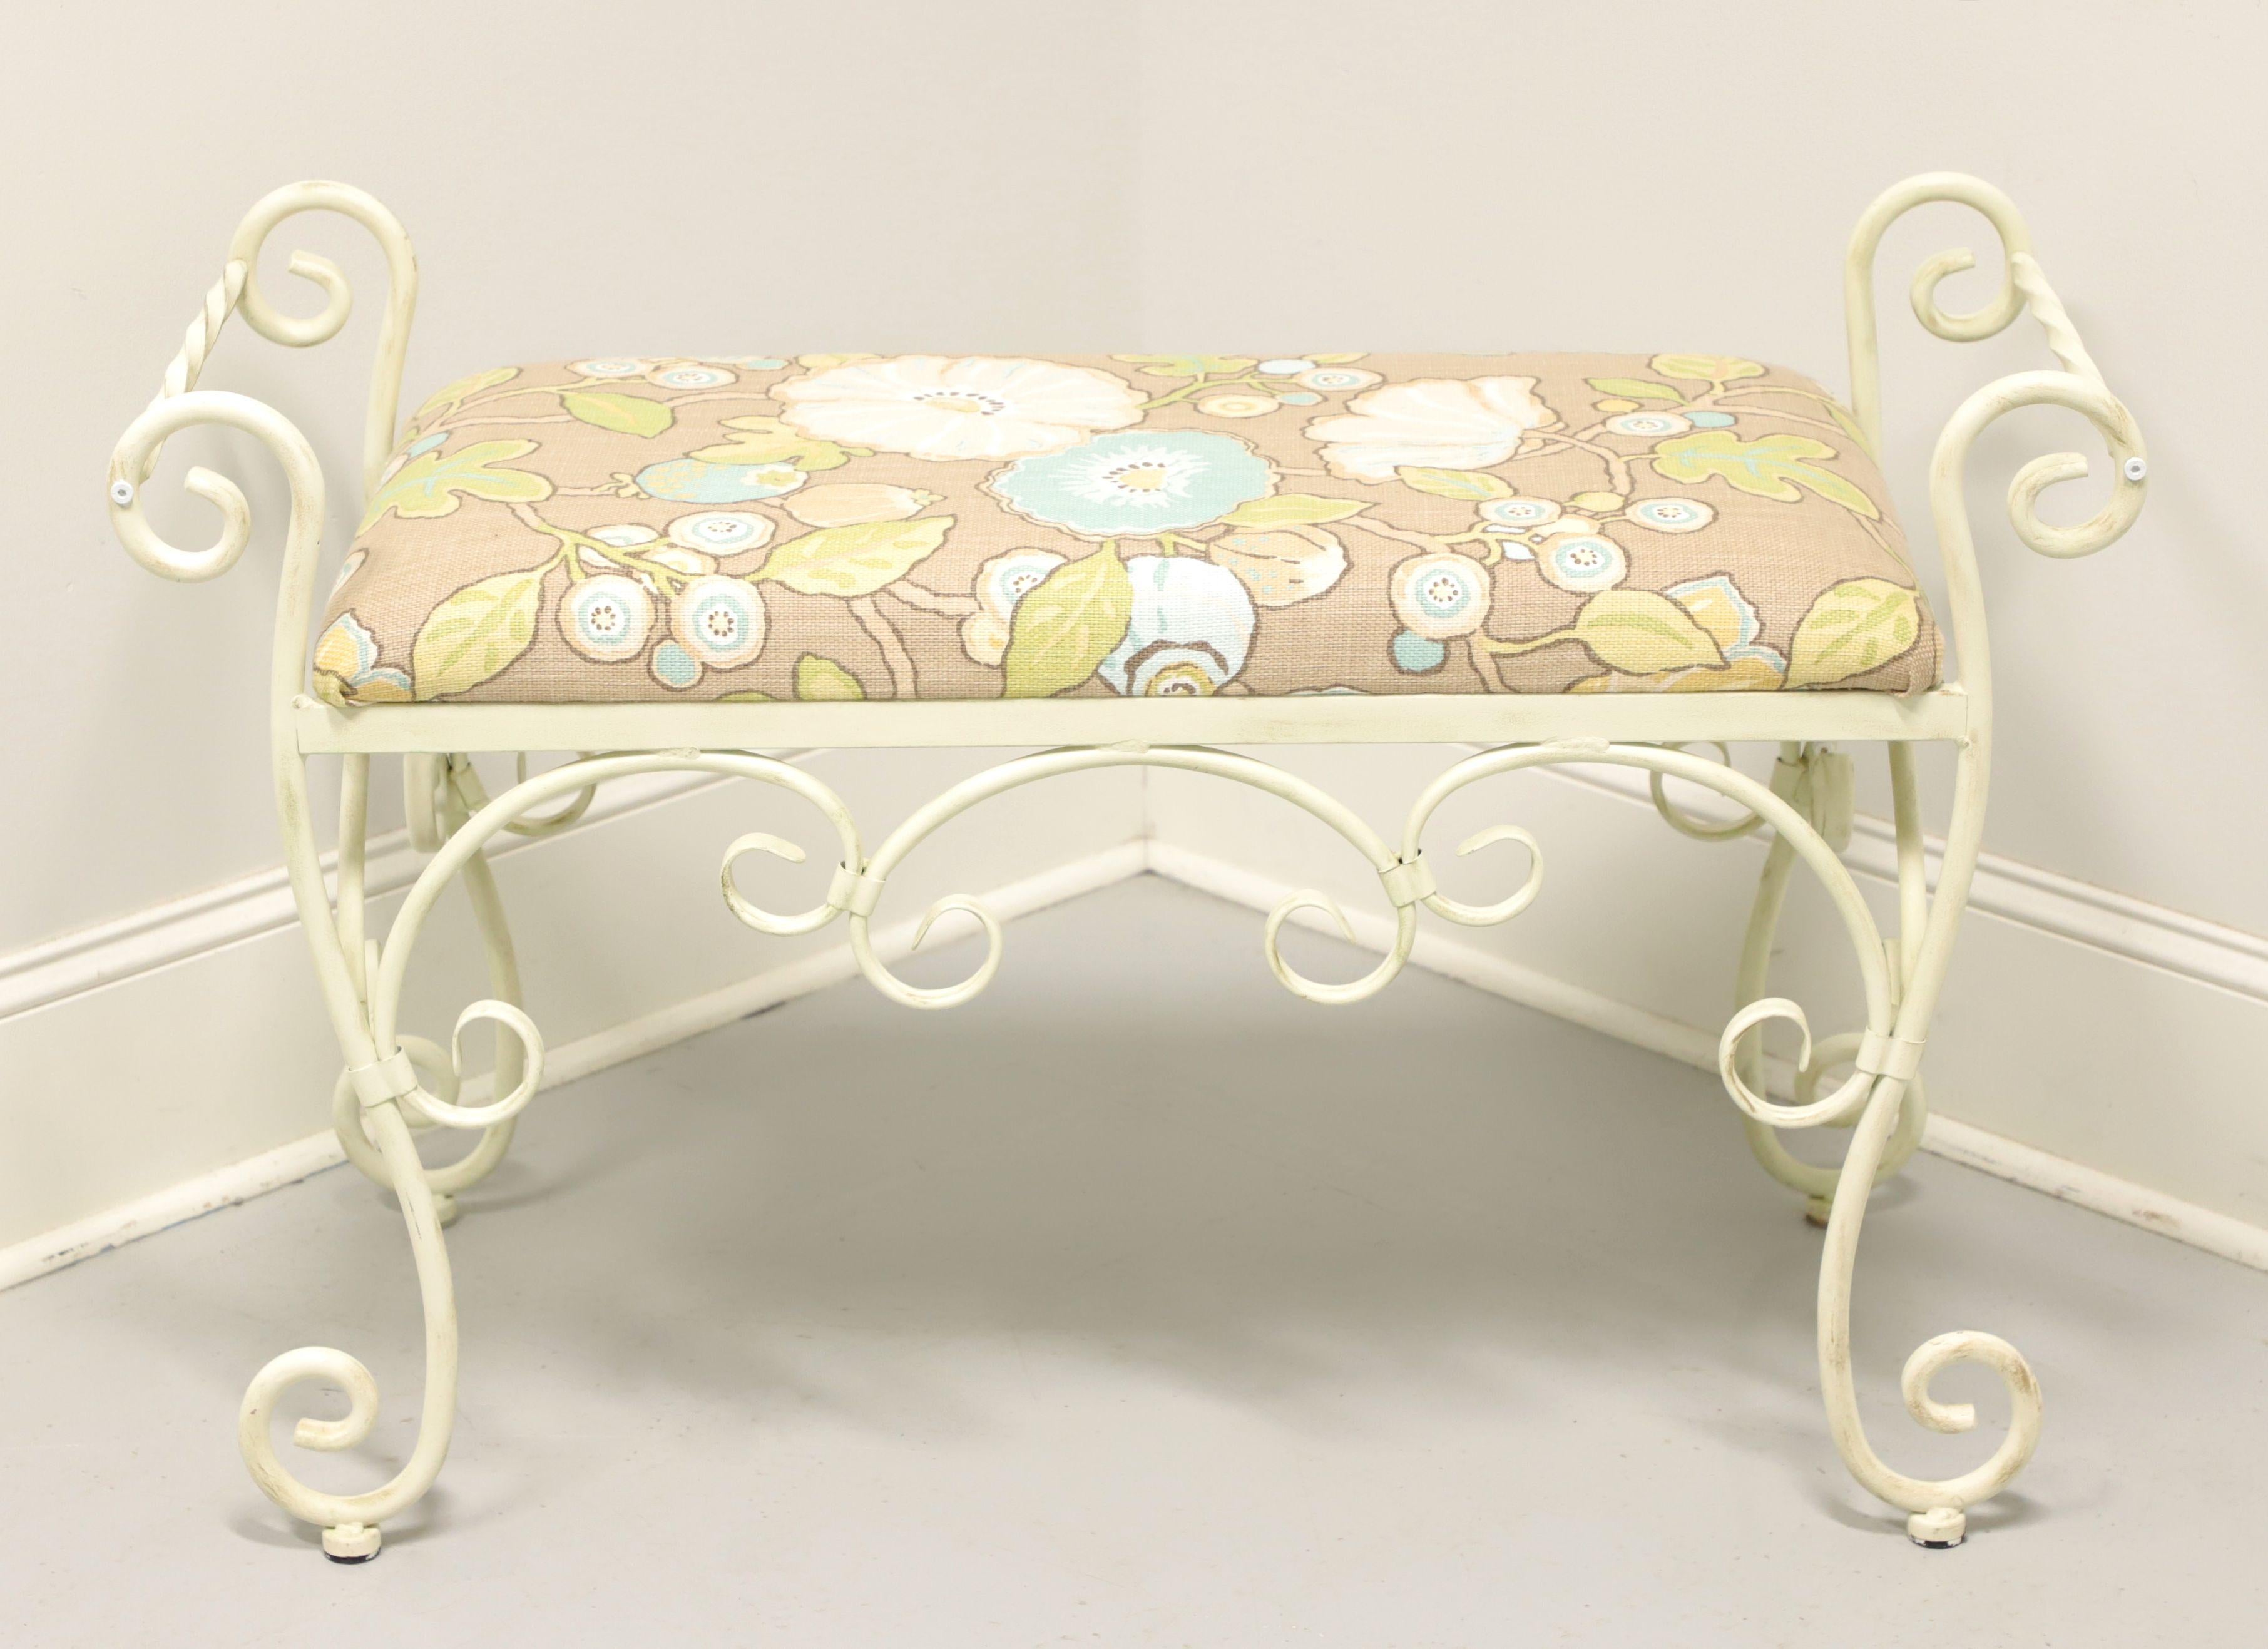 A vanity bench with an Italian style by L. Powell Company, of Culver City, California, USA. Wrought iron painted white with a neutral floral pattern fabric upholstered seat. Features a graceful curved design with turned side handles. Made in the